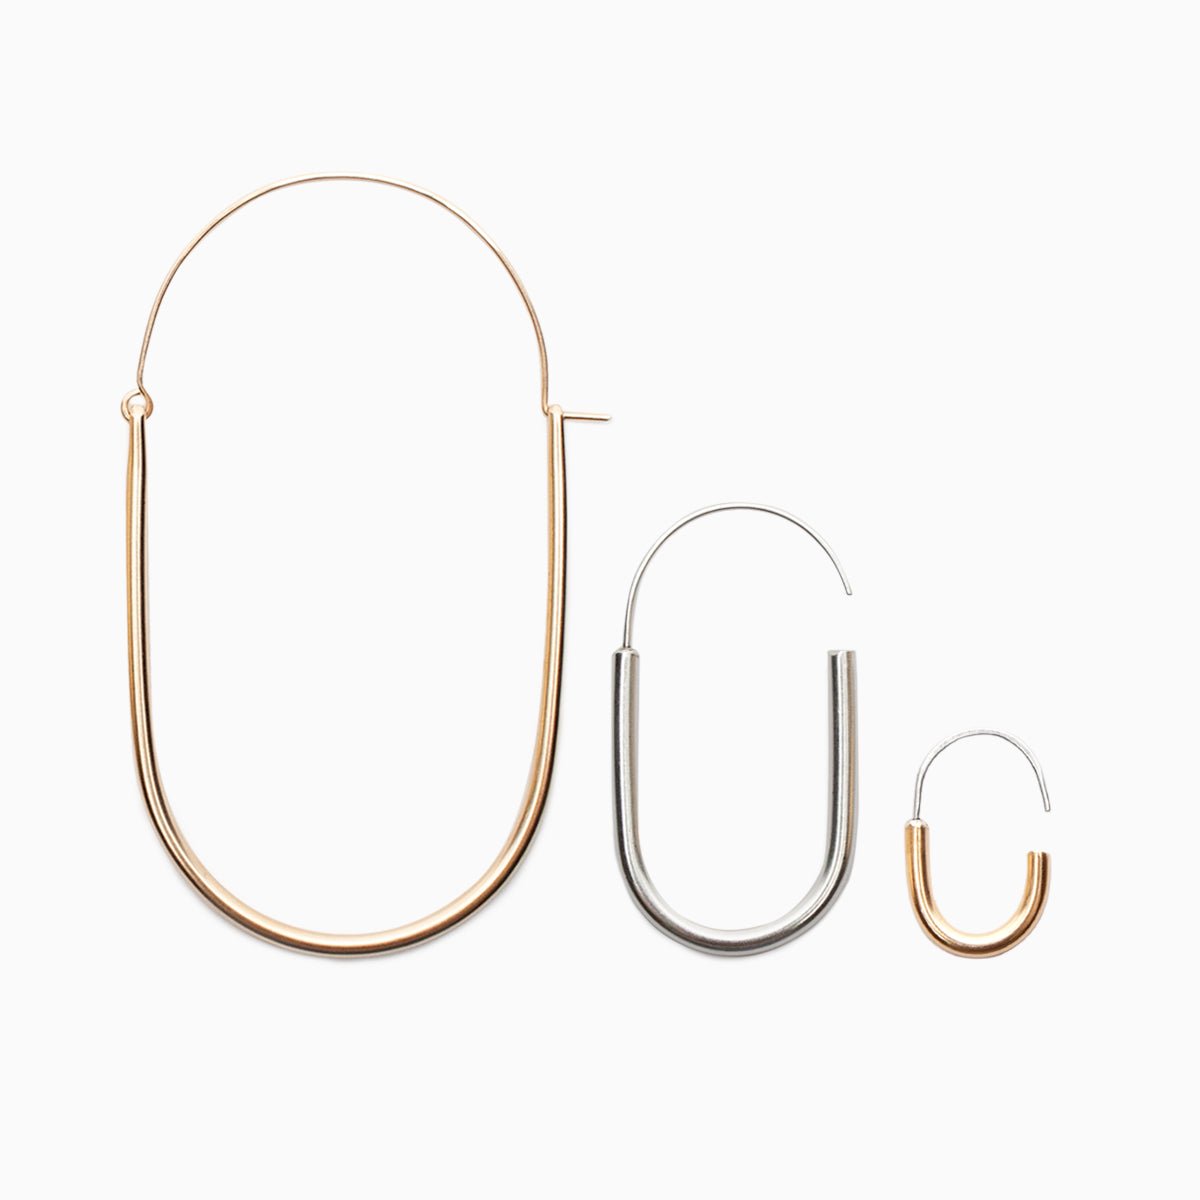 From left to righ: A large gold-fill U-shaped earring with an arched ear wire that meets the top of the U. A small sterling silver U-shaped earring with an arched sterling silver ear wire that leaves a slight opening. A mini brass hoop U-shaped earring with an arched sterling silver ear wire with a slight opening. Designed and handcrafted in Portland, Oregon.